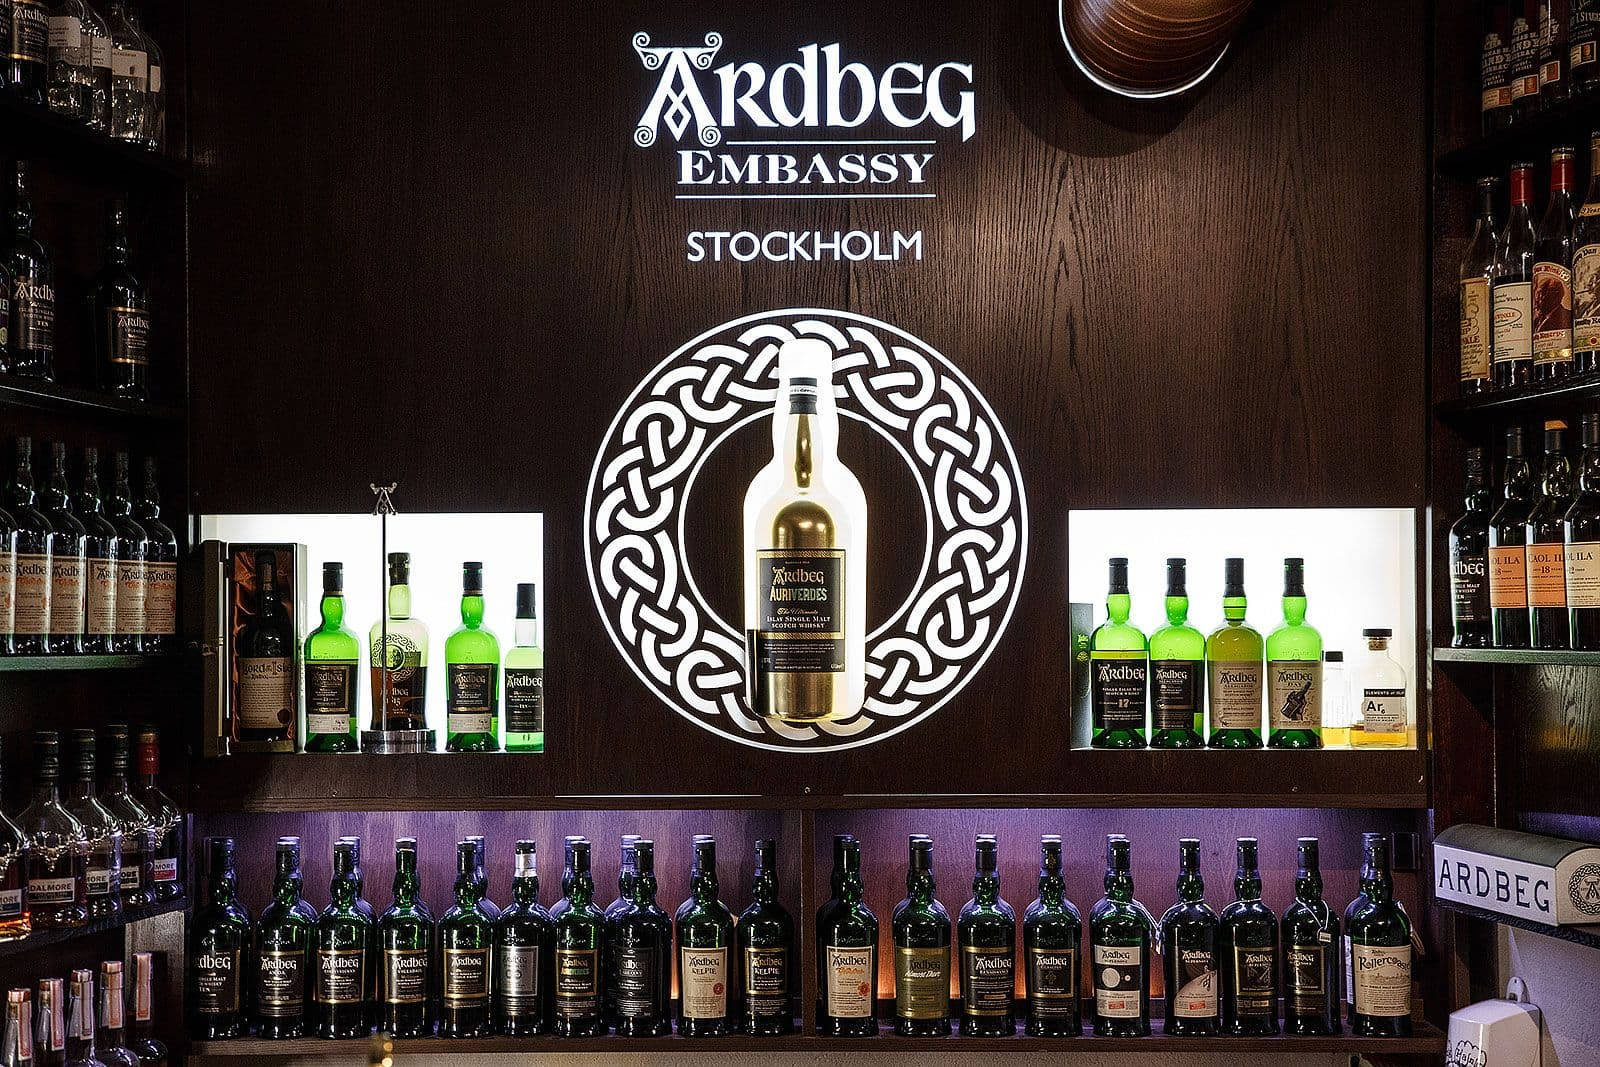 Exquisite Collection of Ardbeg Whisky at the Ardbeg Embassy, Stockholm Wallpaper